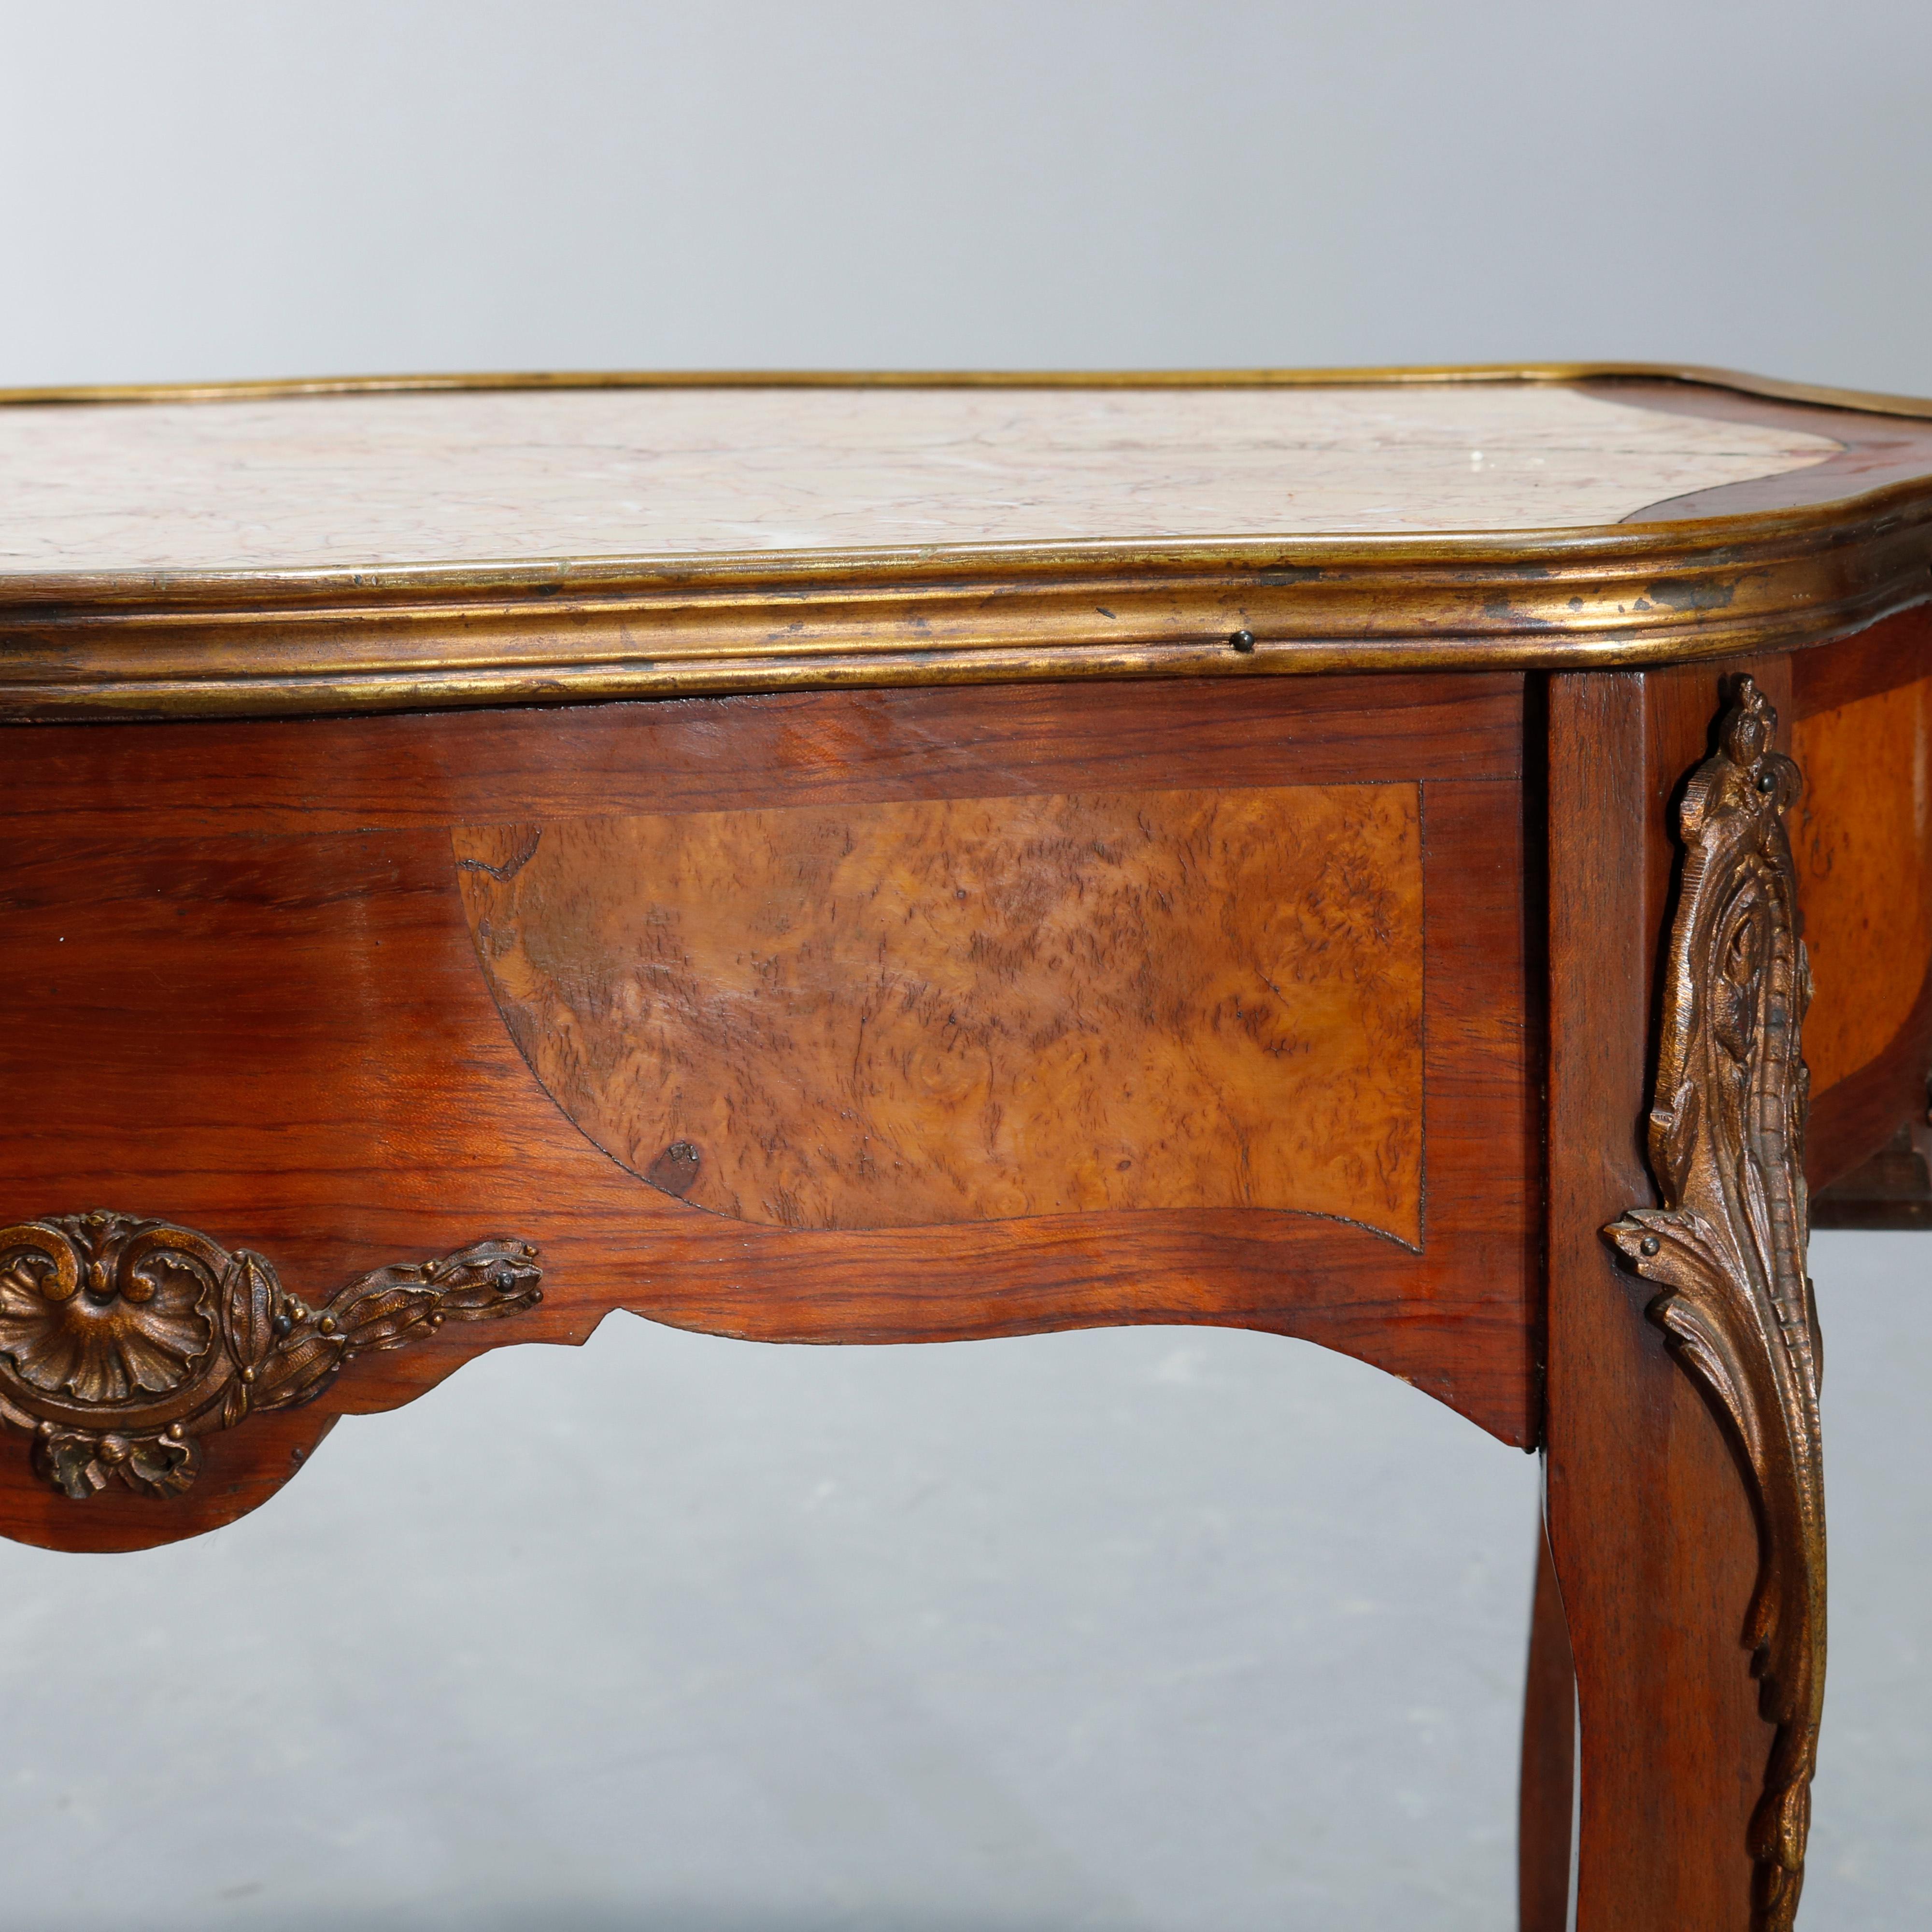 20th Century Antique French Louis XIV Satinwood & Ormolu Marble Top Side Table, Circa 1900